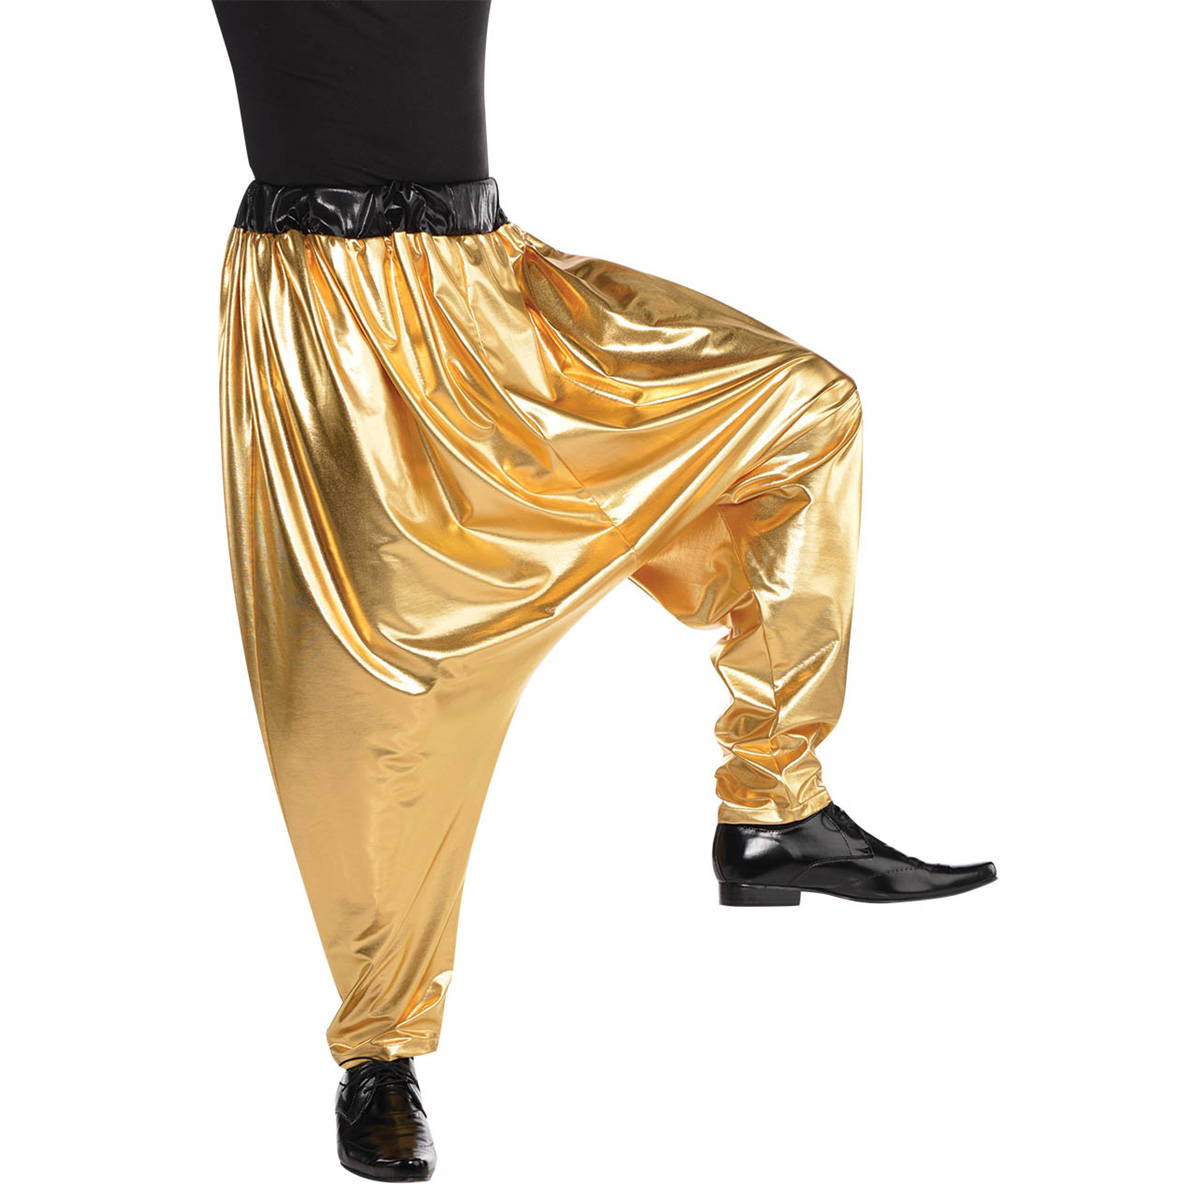 SUIT YOURSELF COSTUME CO. Costume Accessories Hip Hop Harem Pants for Adults